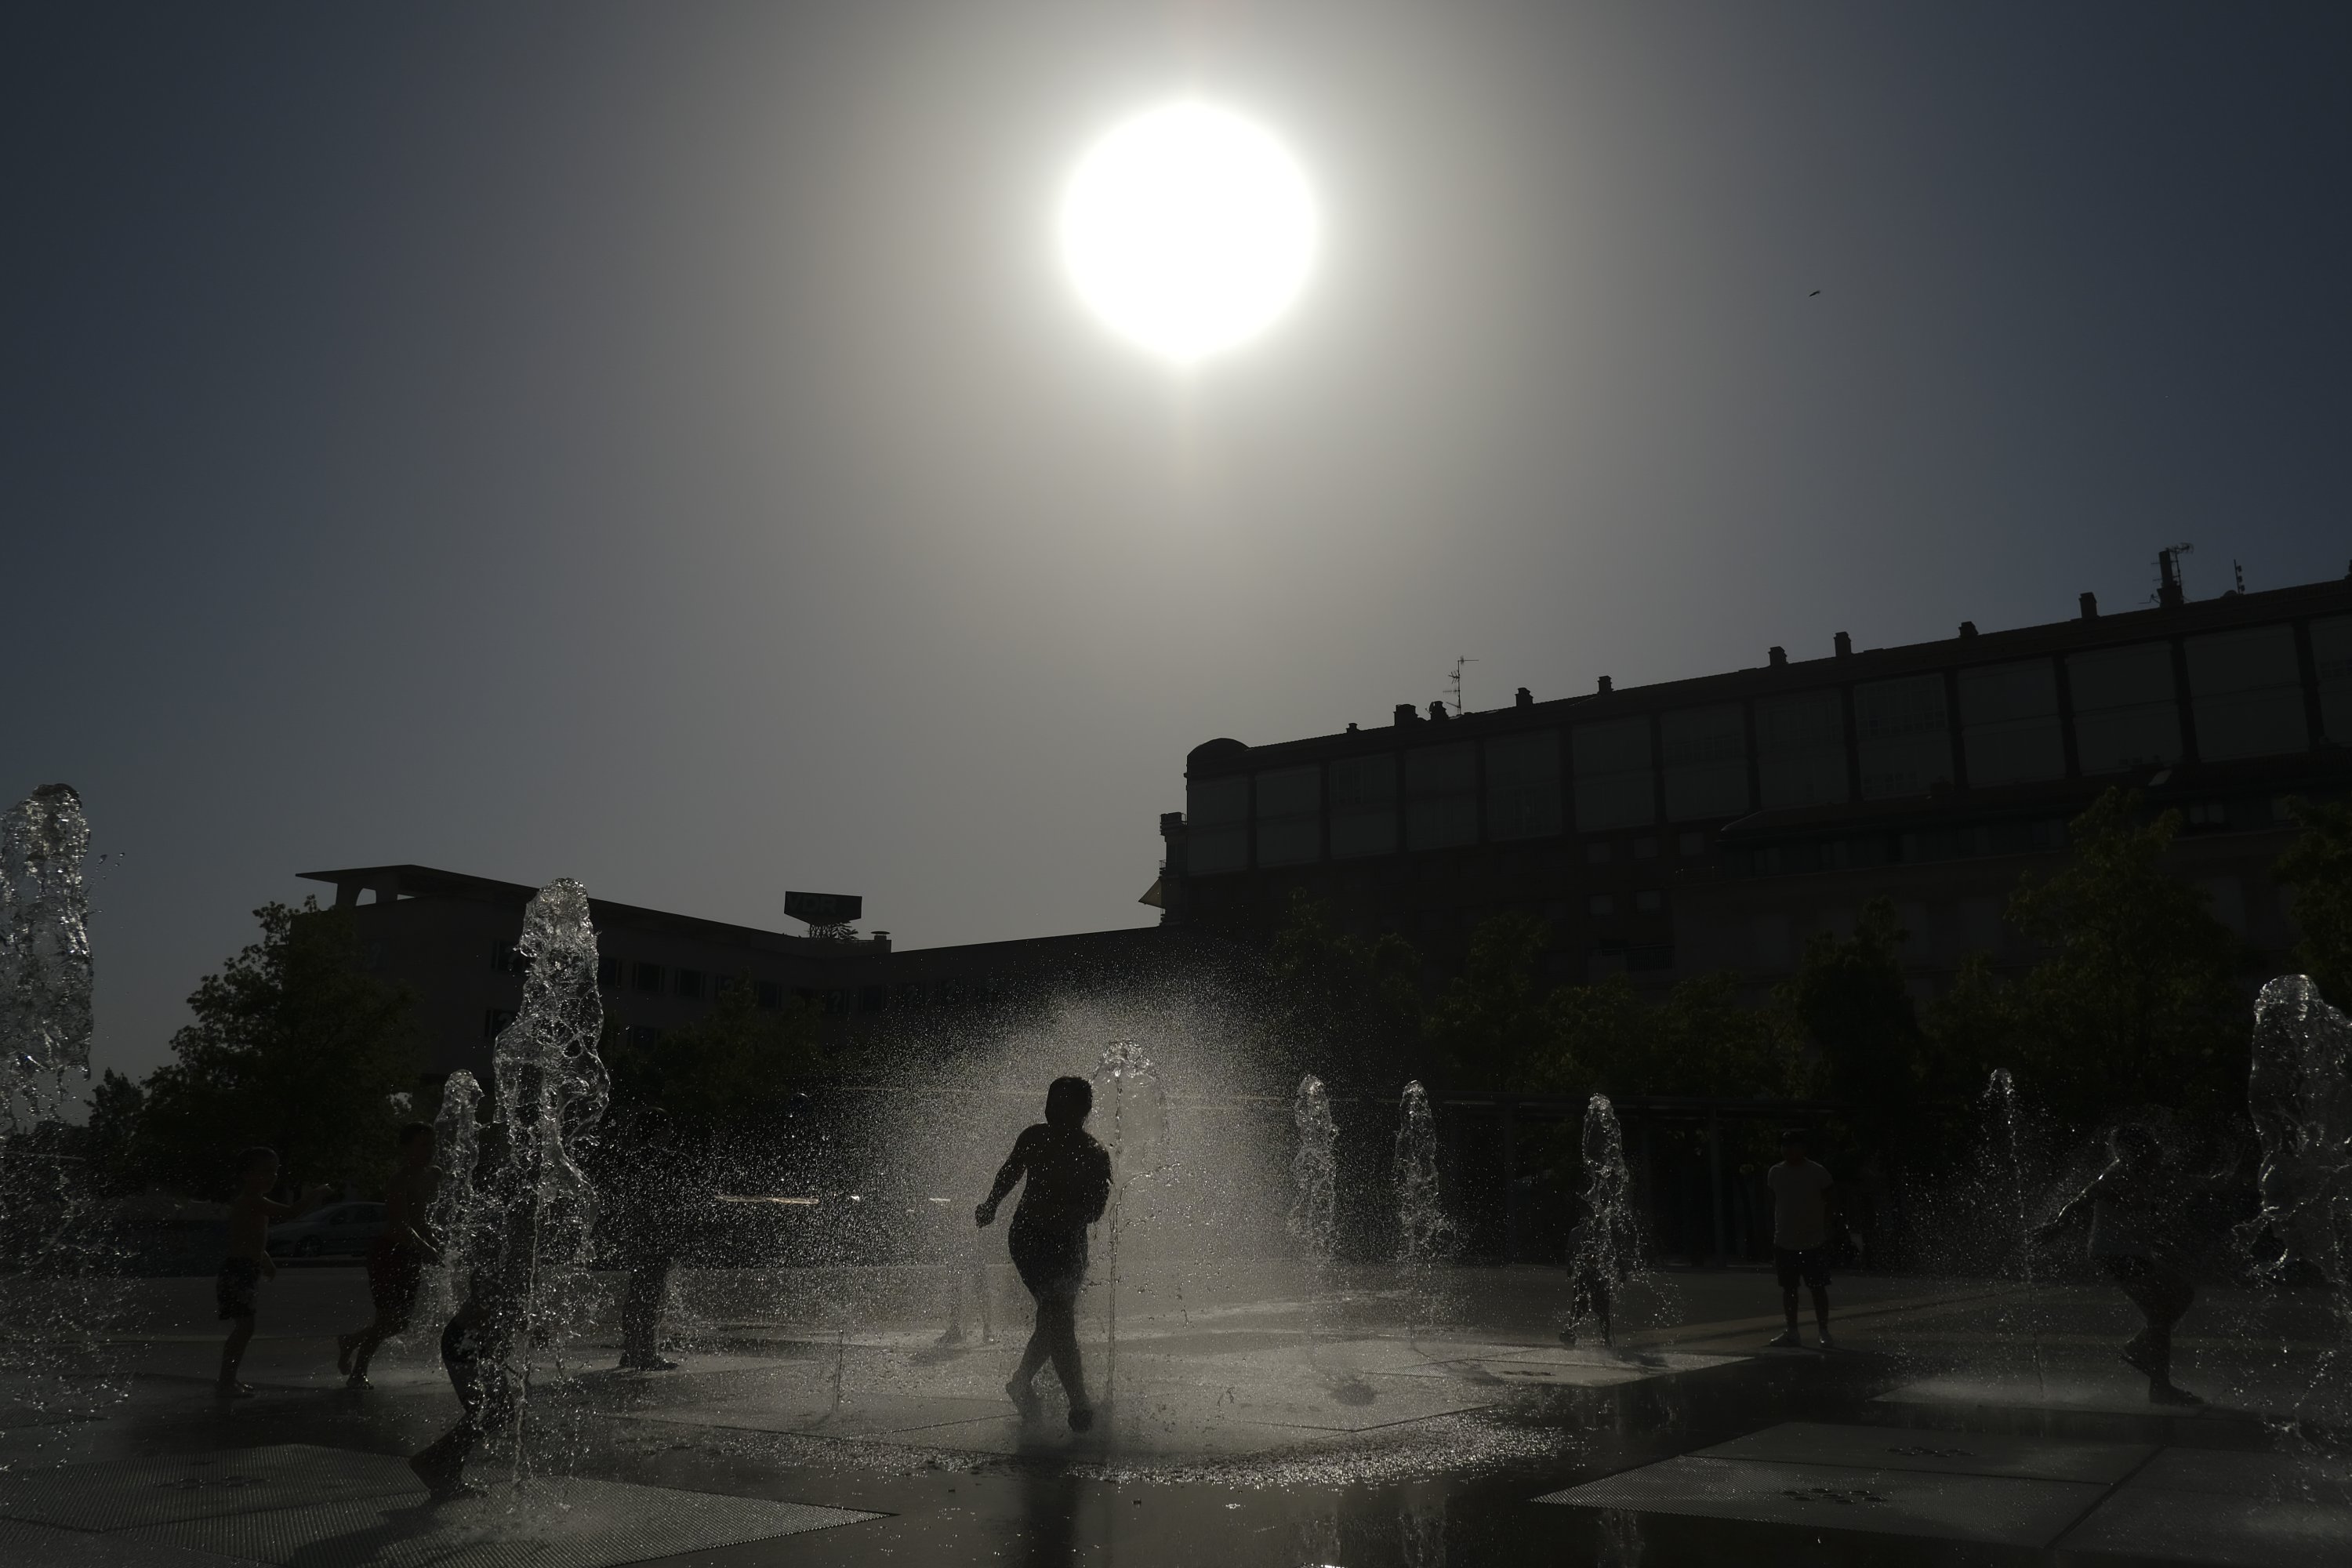 A child cools off with the water to the fountain during a heatwave in Pamplona, northern Spain, Aug. 13, 2021. (AP Photo)